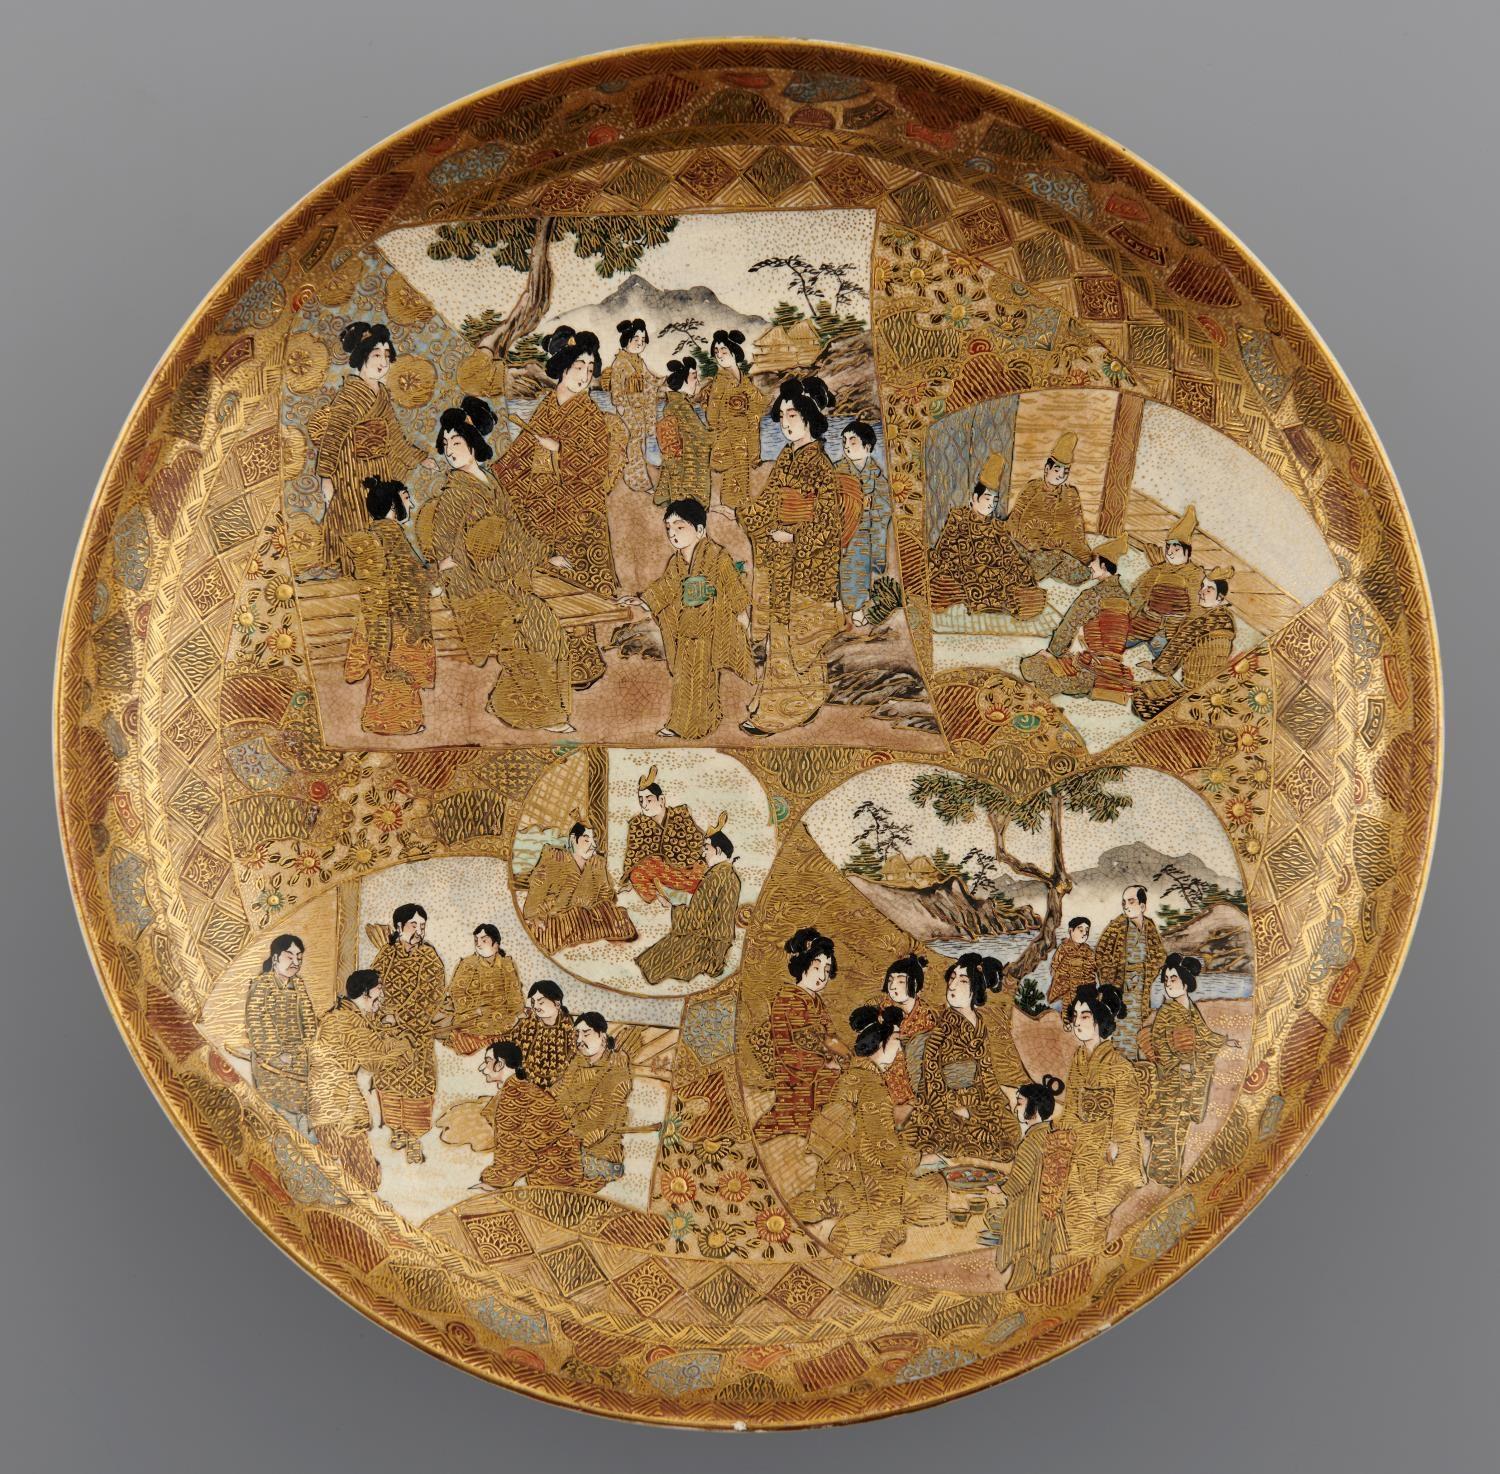 A JAPANESE SATSUMA EARTHENWARE DISH, MEIJI PERIOD  decorated with fan shaped panels of dignitaries